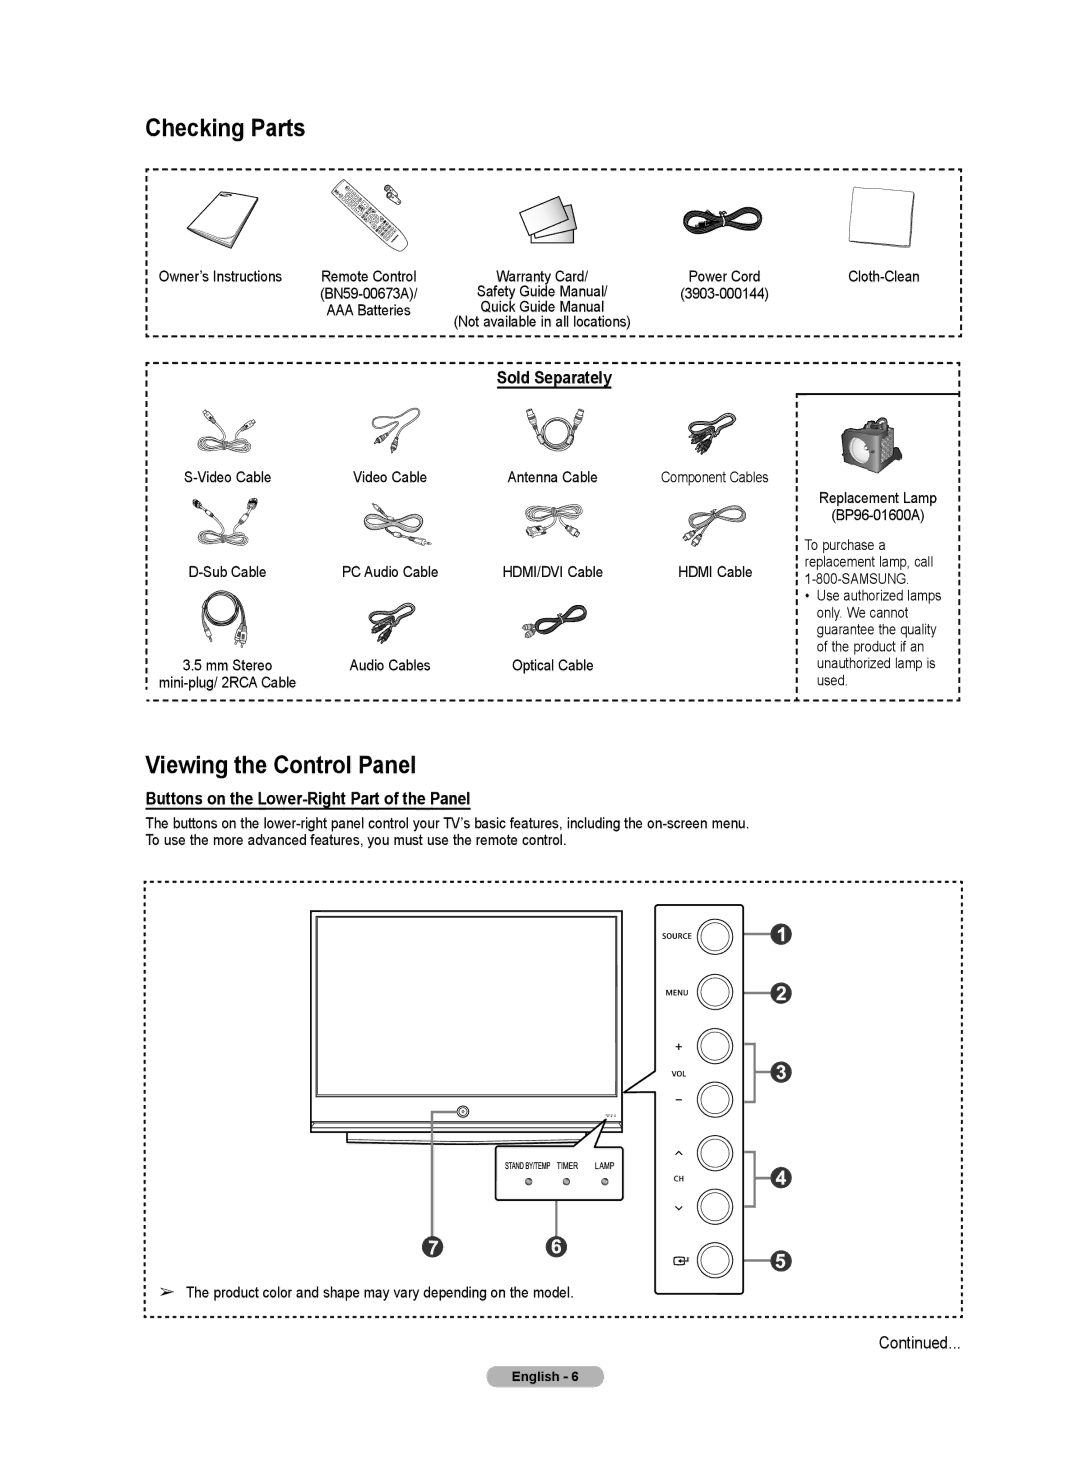 Samsung HL72A650C1F user manual Checking Parts, Viewing the Control Panel, Sold Separately 